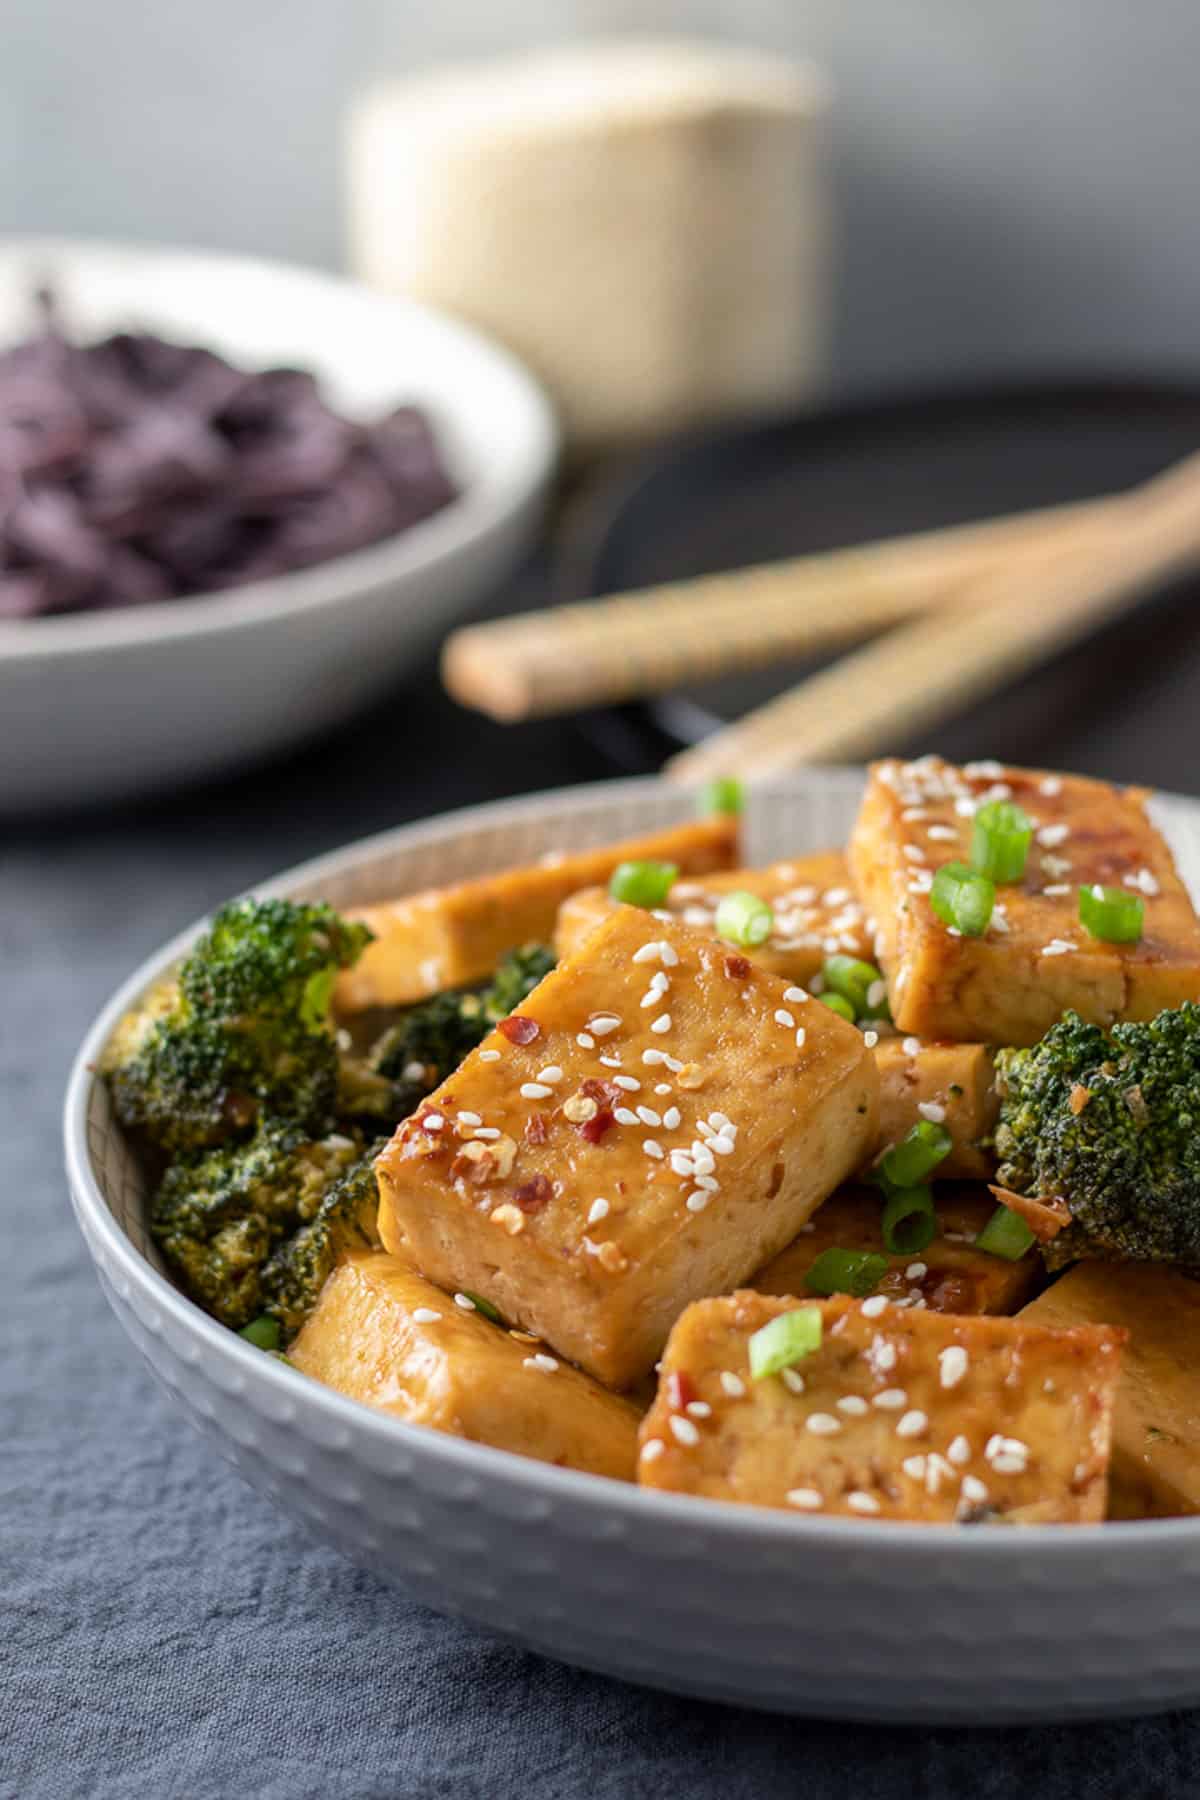 Sticky Sesame Tofu With Broccoli in a gray bowl with noodles and chop sticks in background.